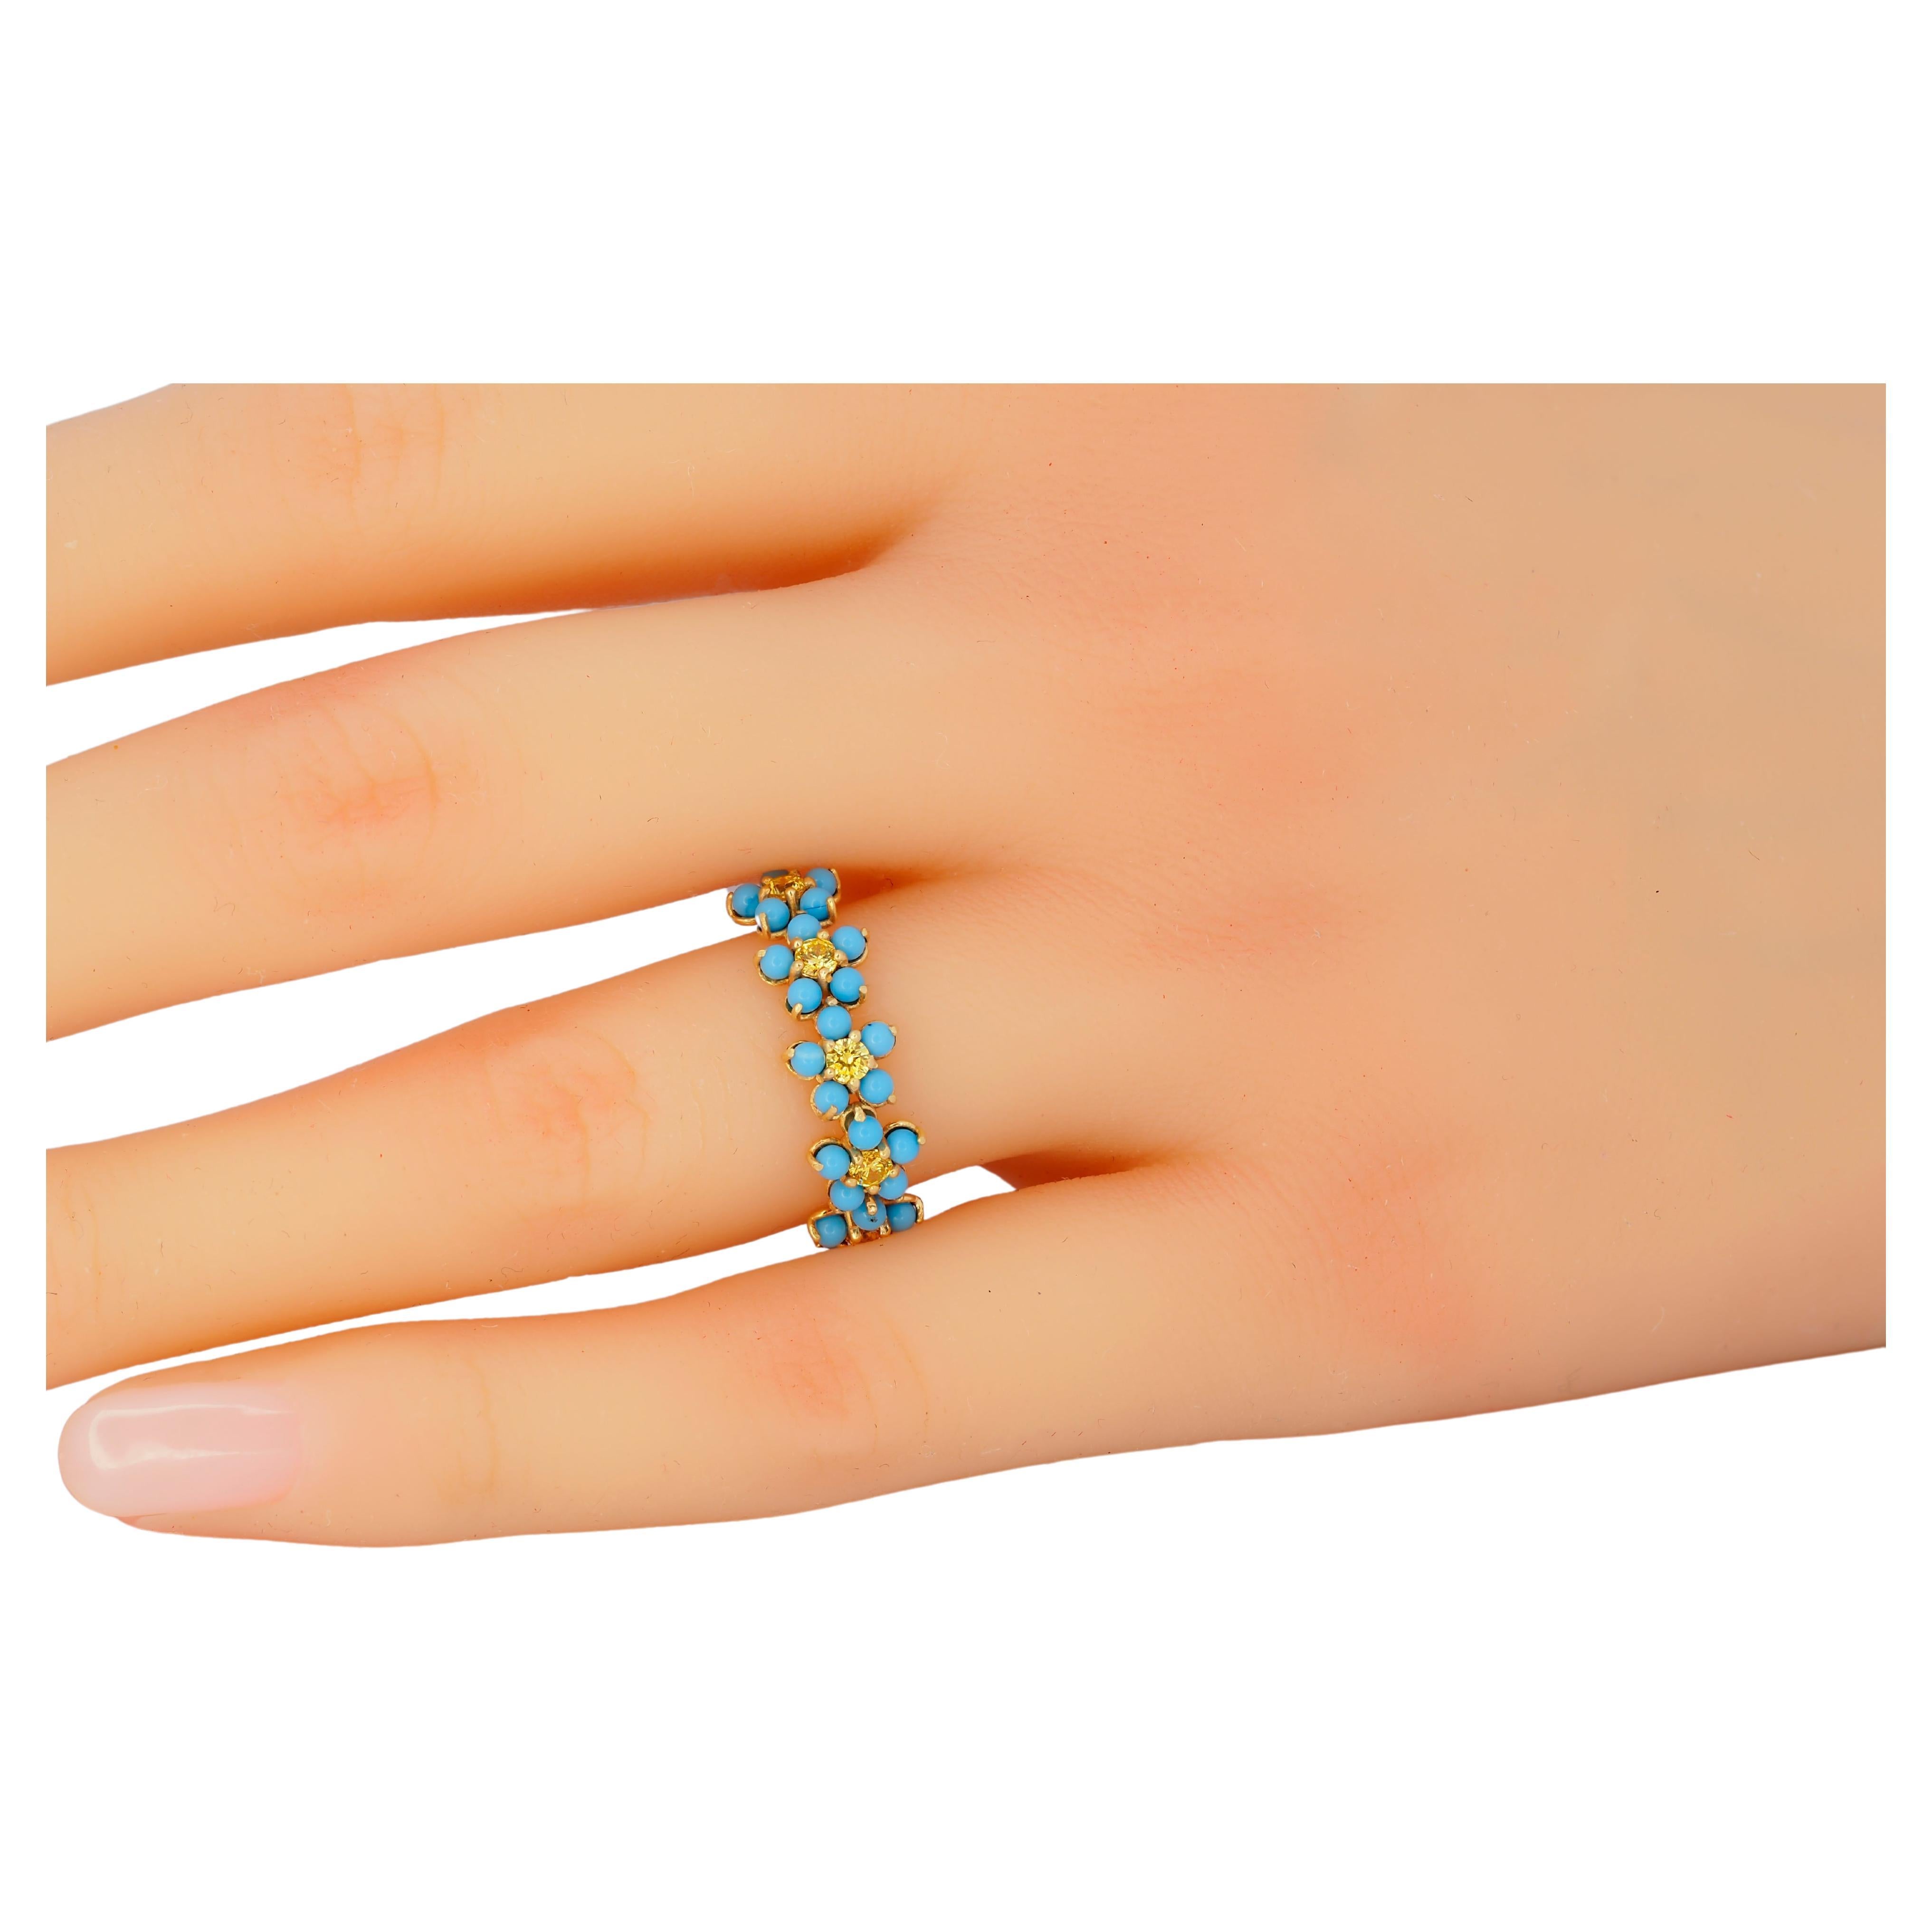 Forget me knot flower 14k gold ring For Sale